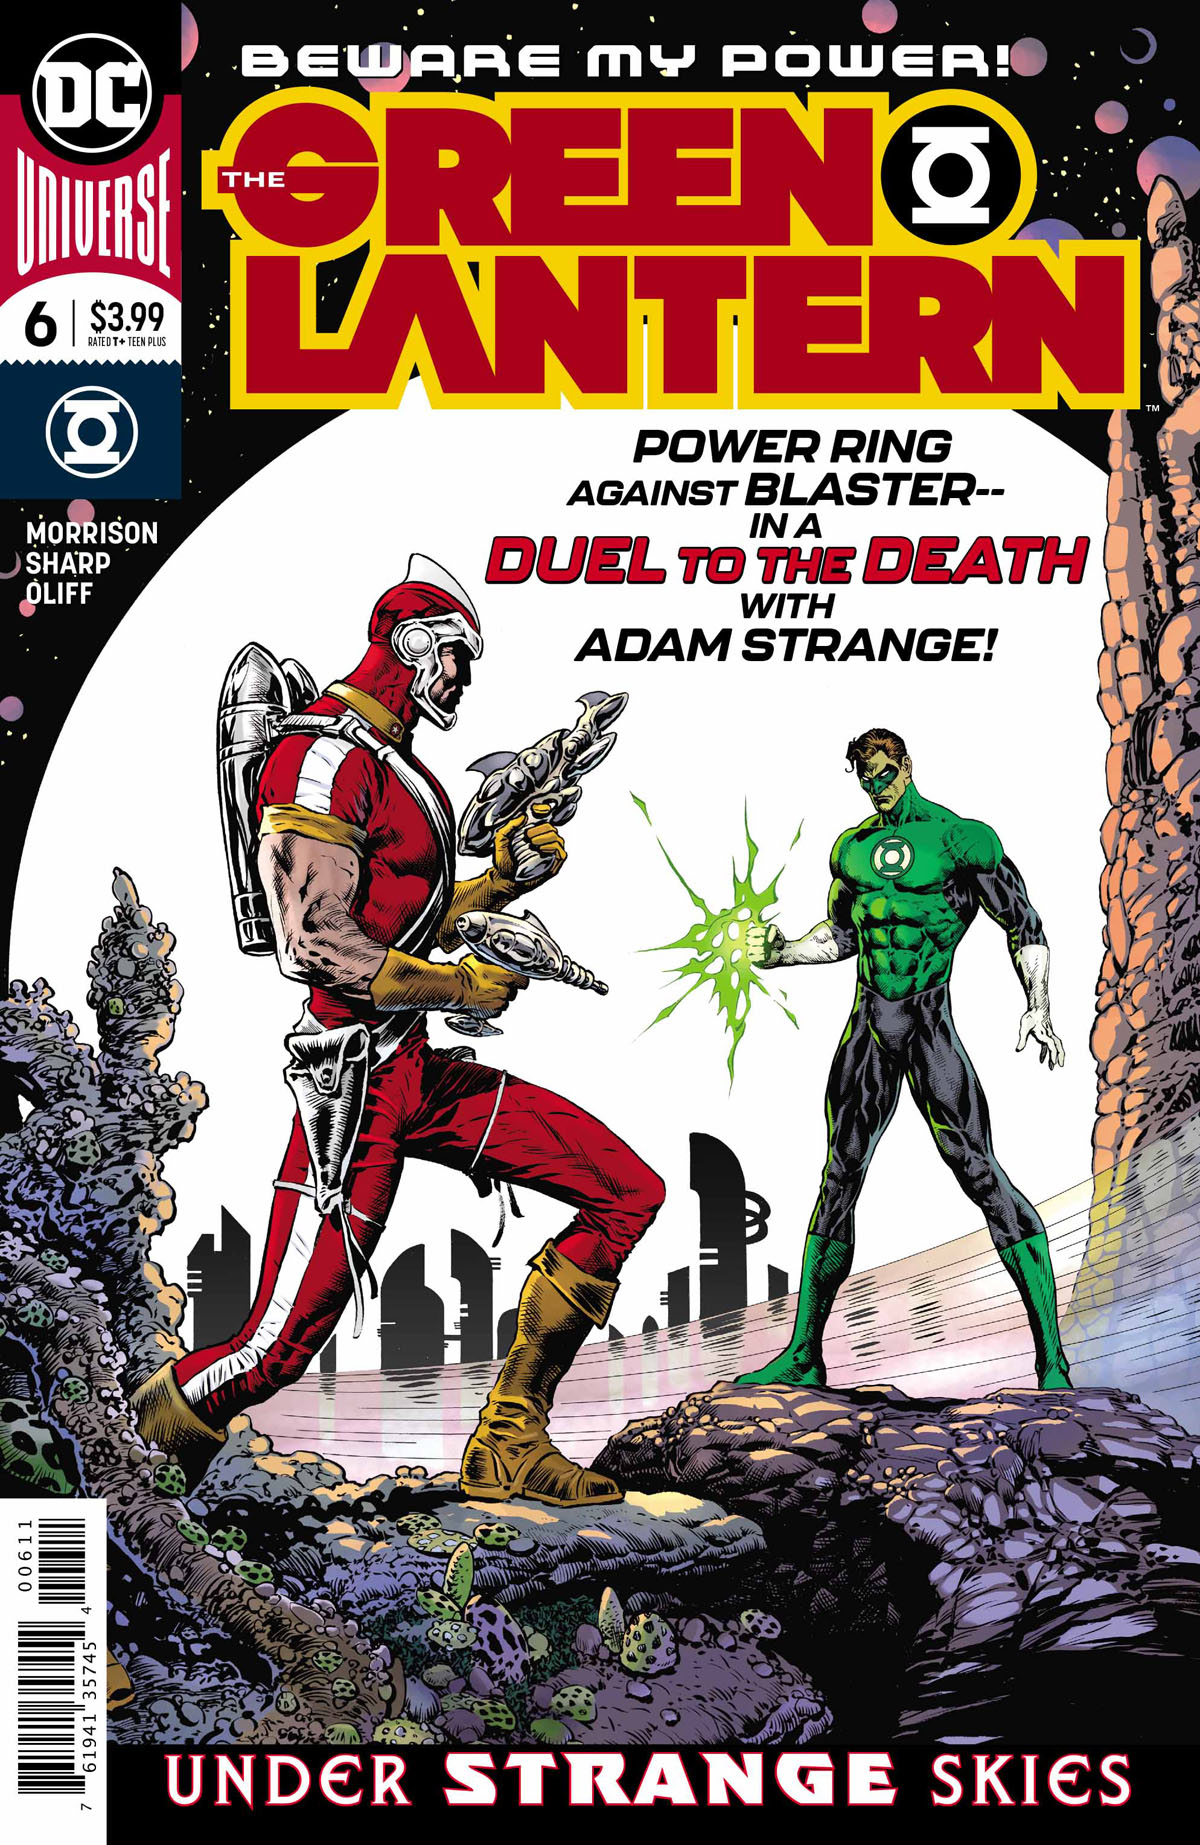 The Green Lantern #6 cover